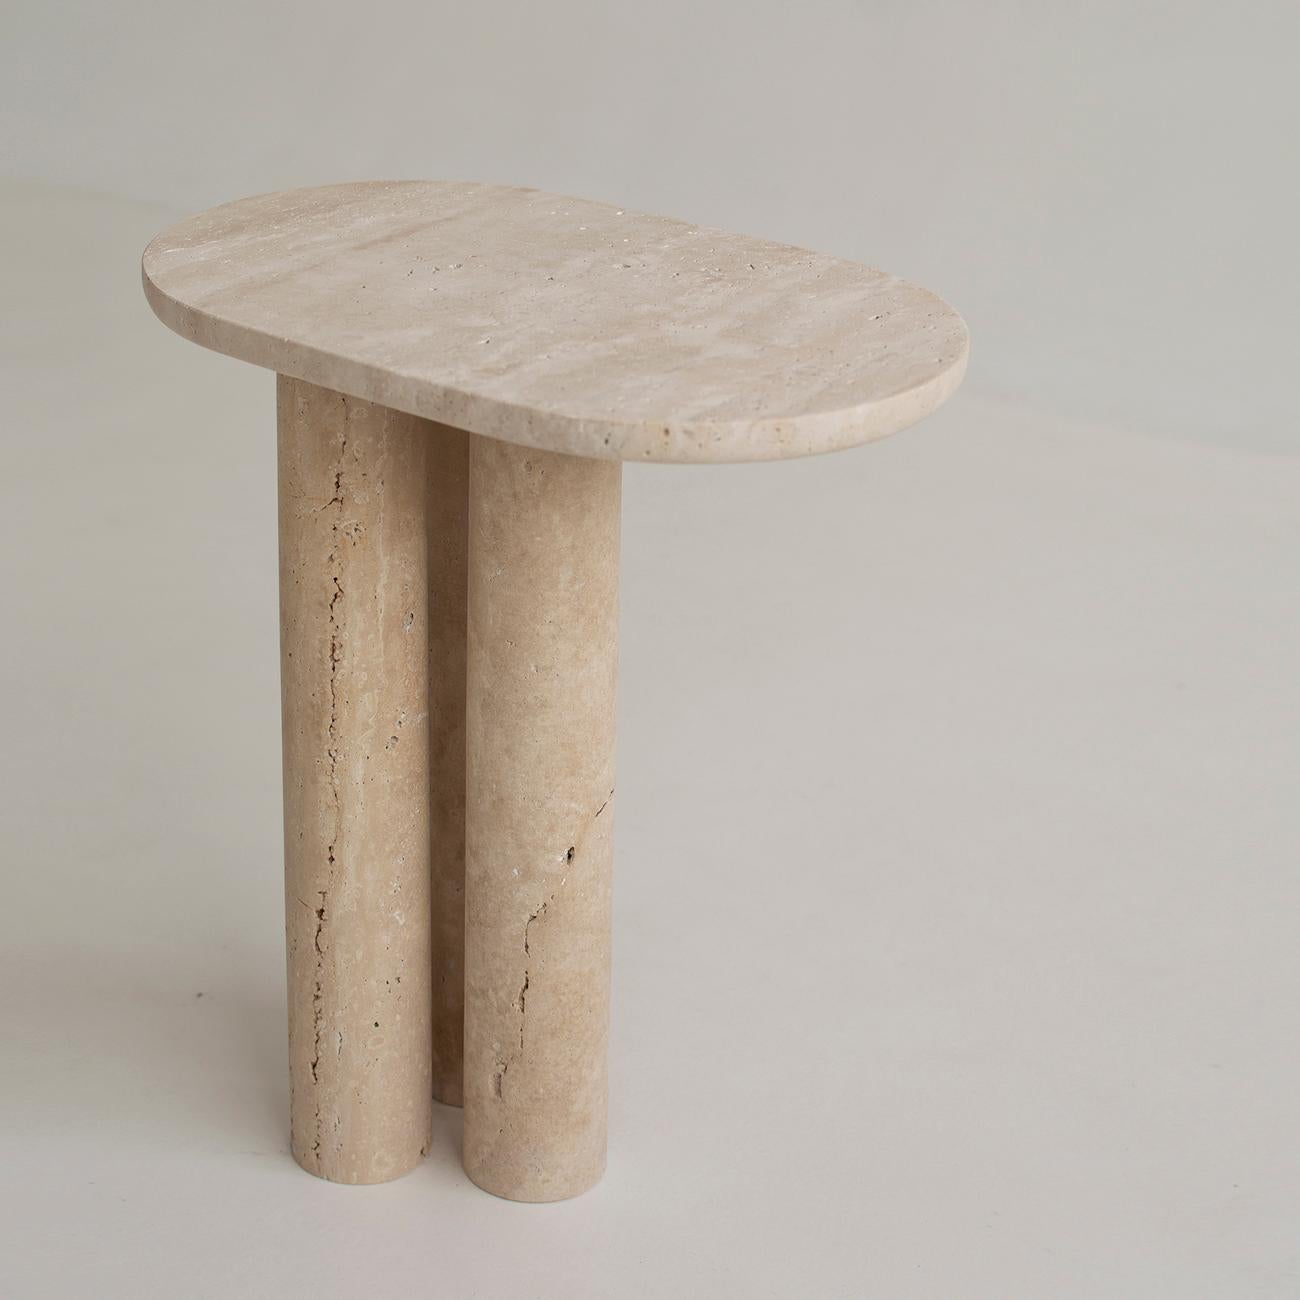 Travertine side table on three pieces of cylinder.

Stunning, aesthetic, timeless are words that can be used to describe this elegant and modern travertine side table from Kiwano. Expertly crafted and finished by hand, our travertine side tables